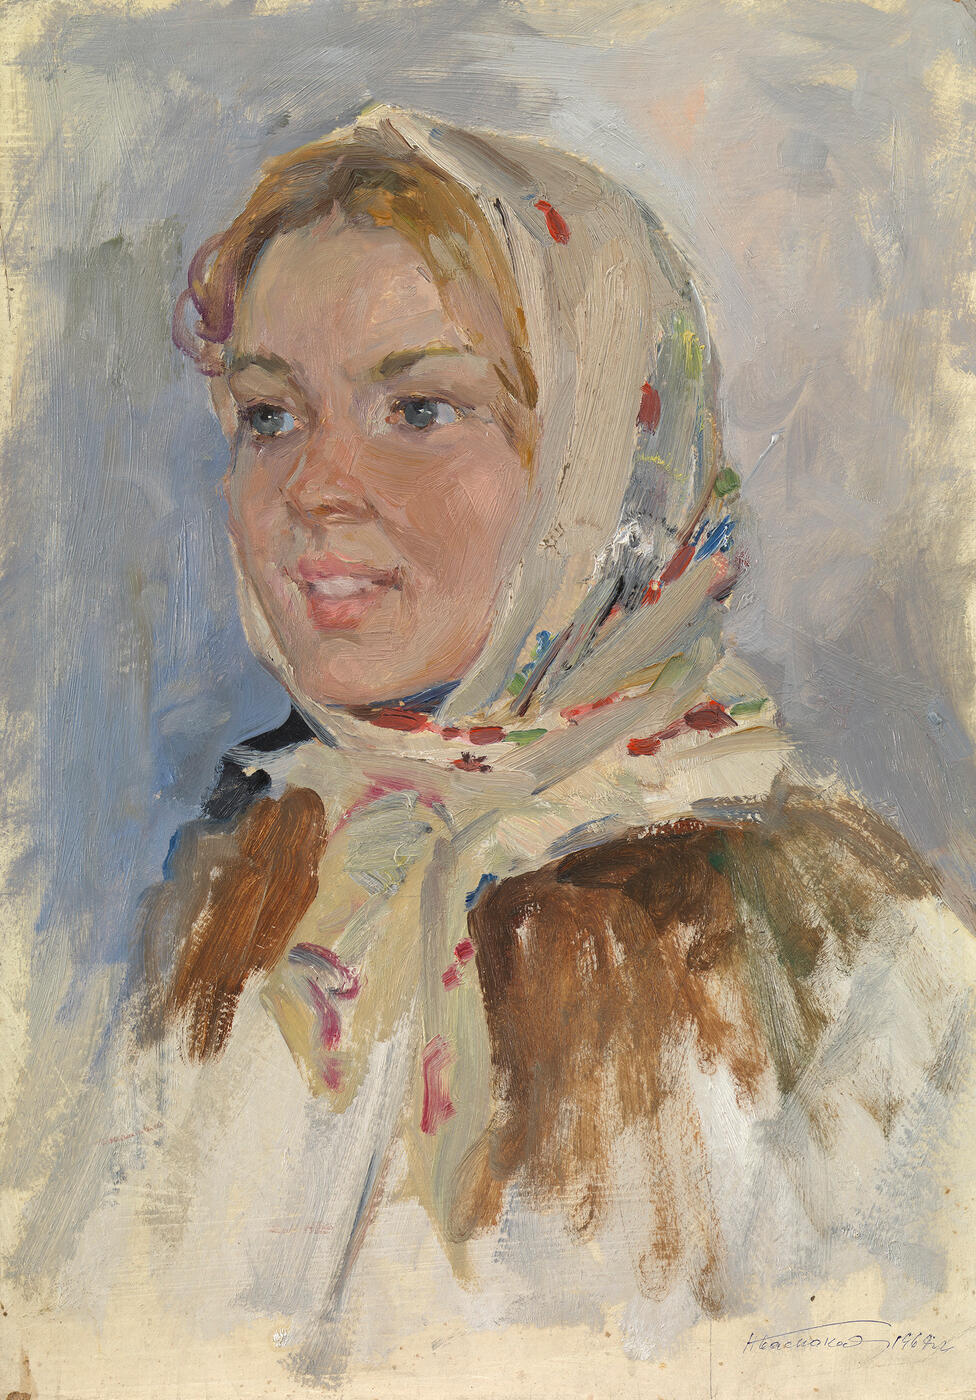 Portrait of a Girl. Study for the Painting "Festival of Russian Winter"